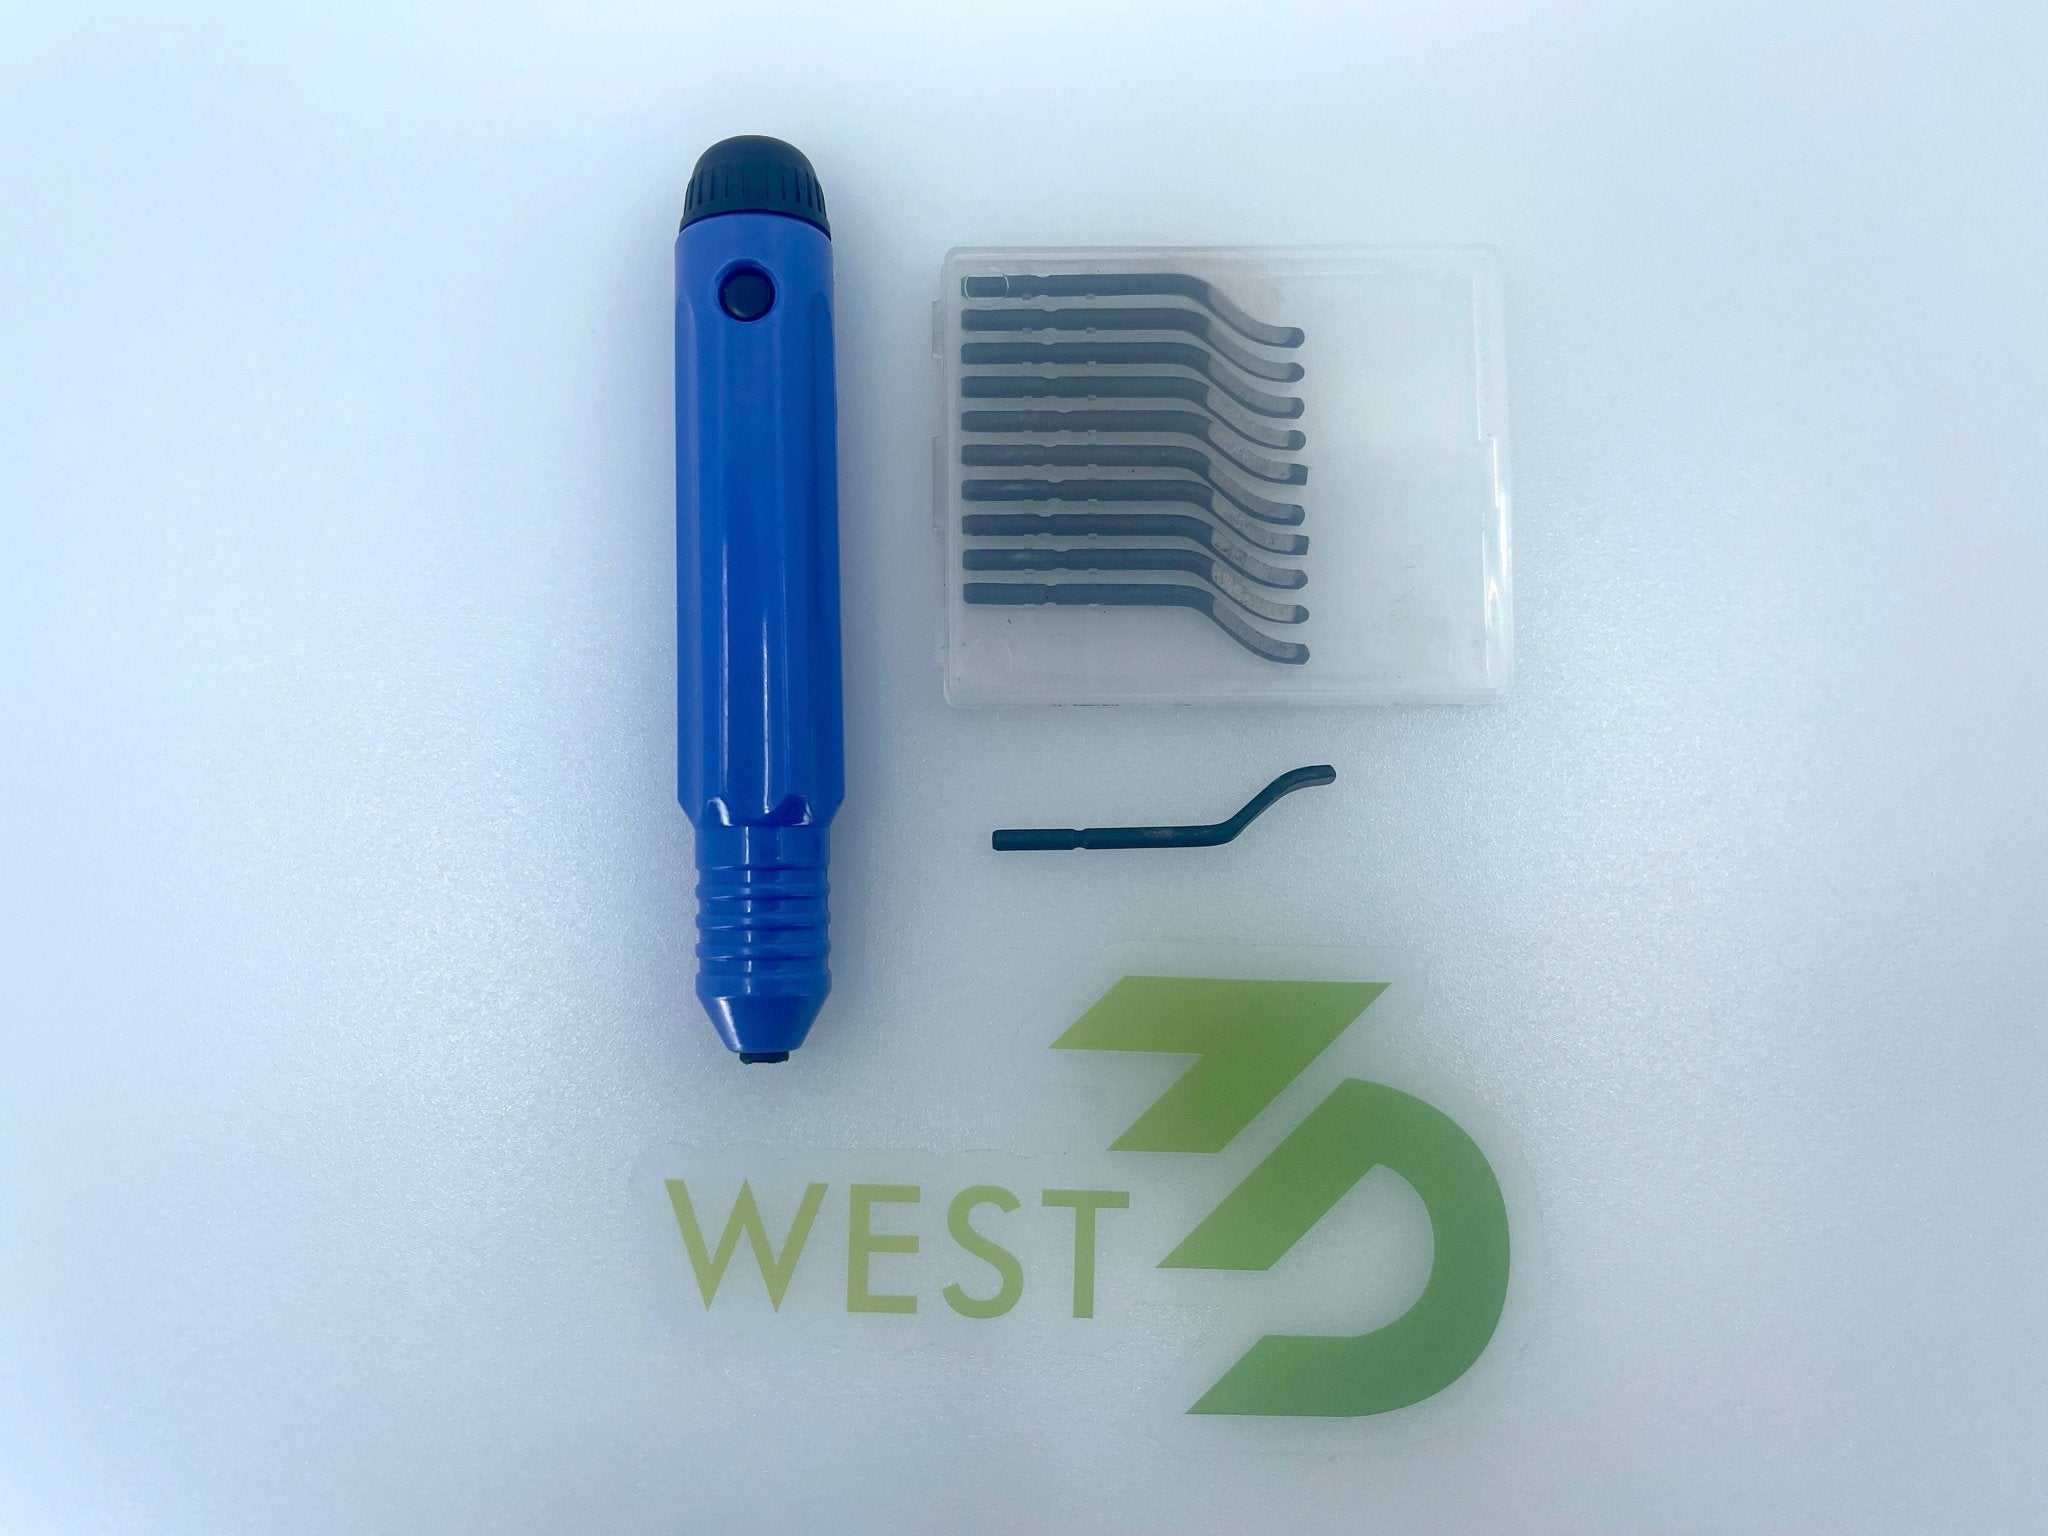 Deburring tool with 10 rotary deburr blades for 3D printing post processing - West3D Printing - N/A